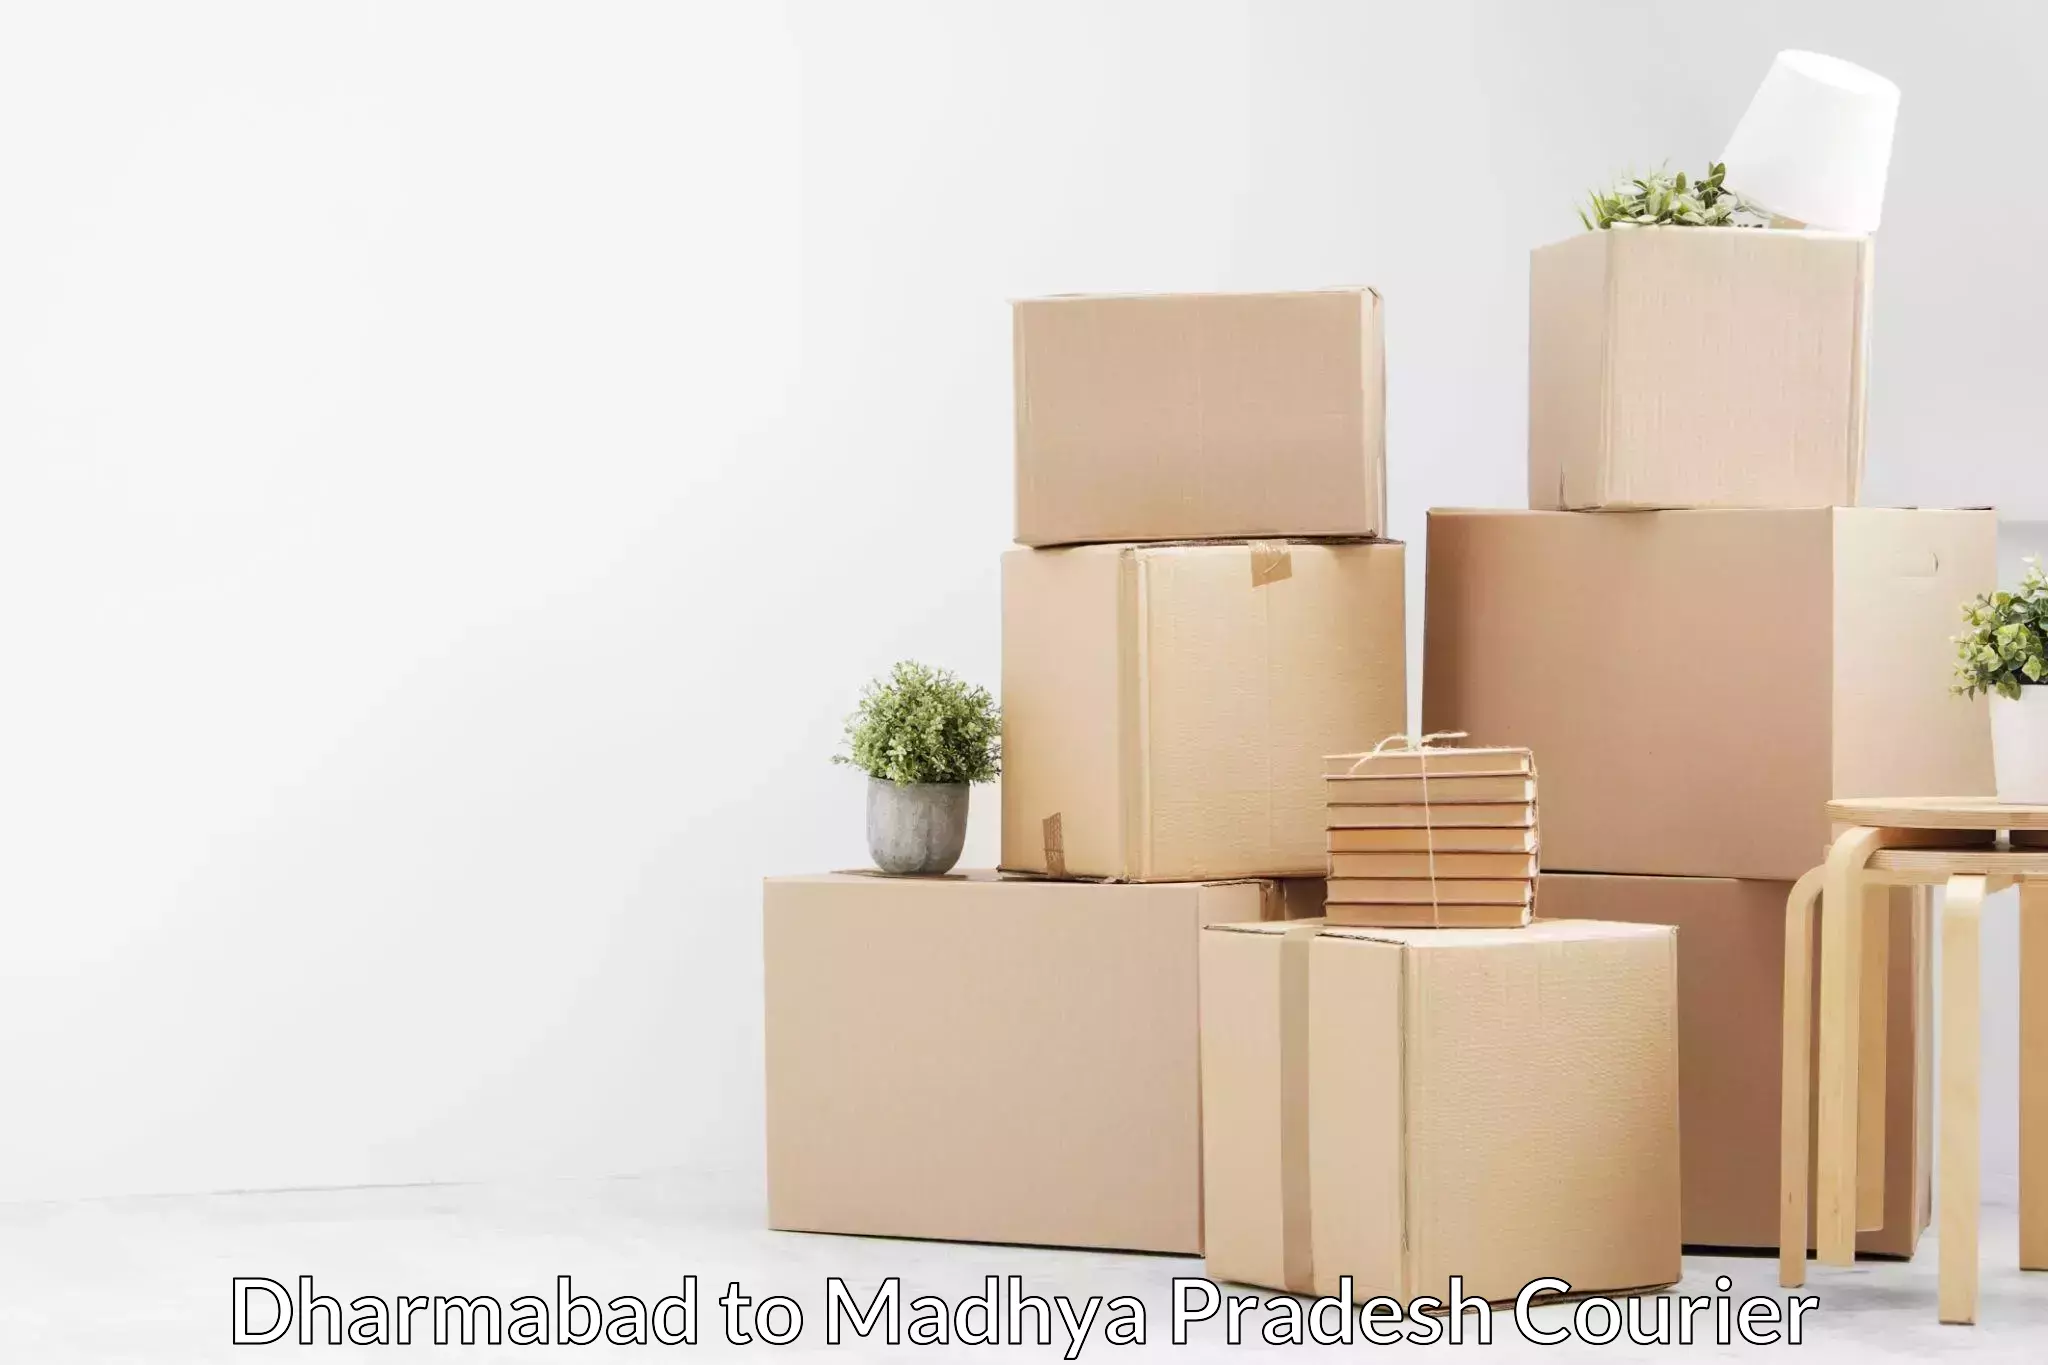 Professional relocation services Dharmabad to Indore